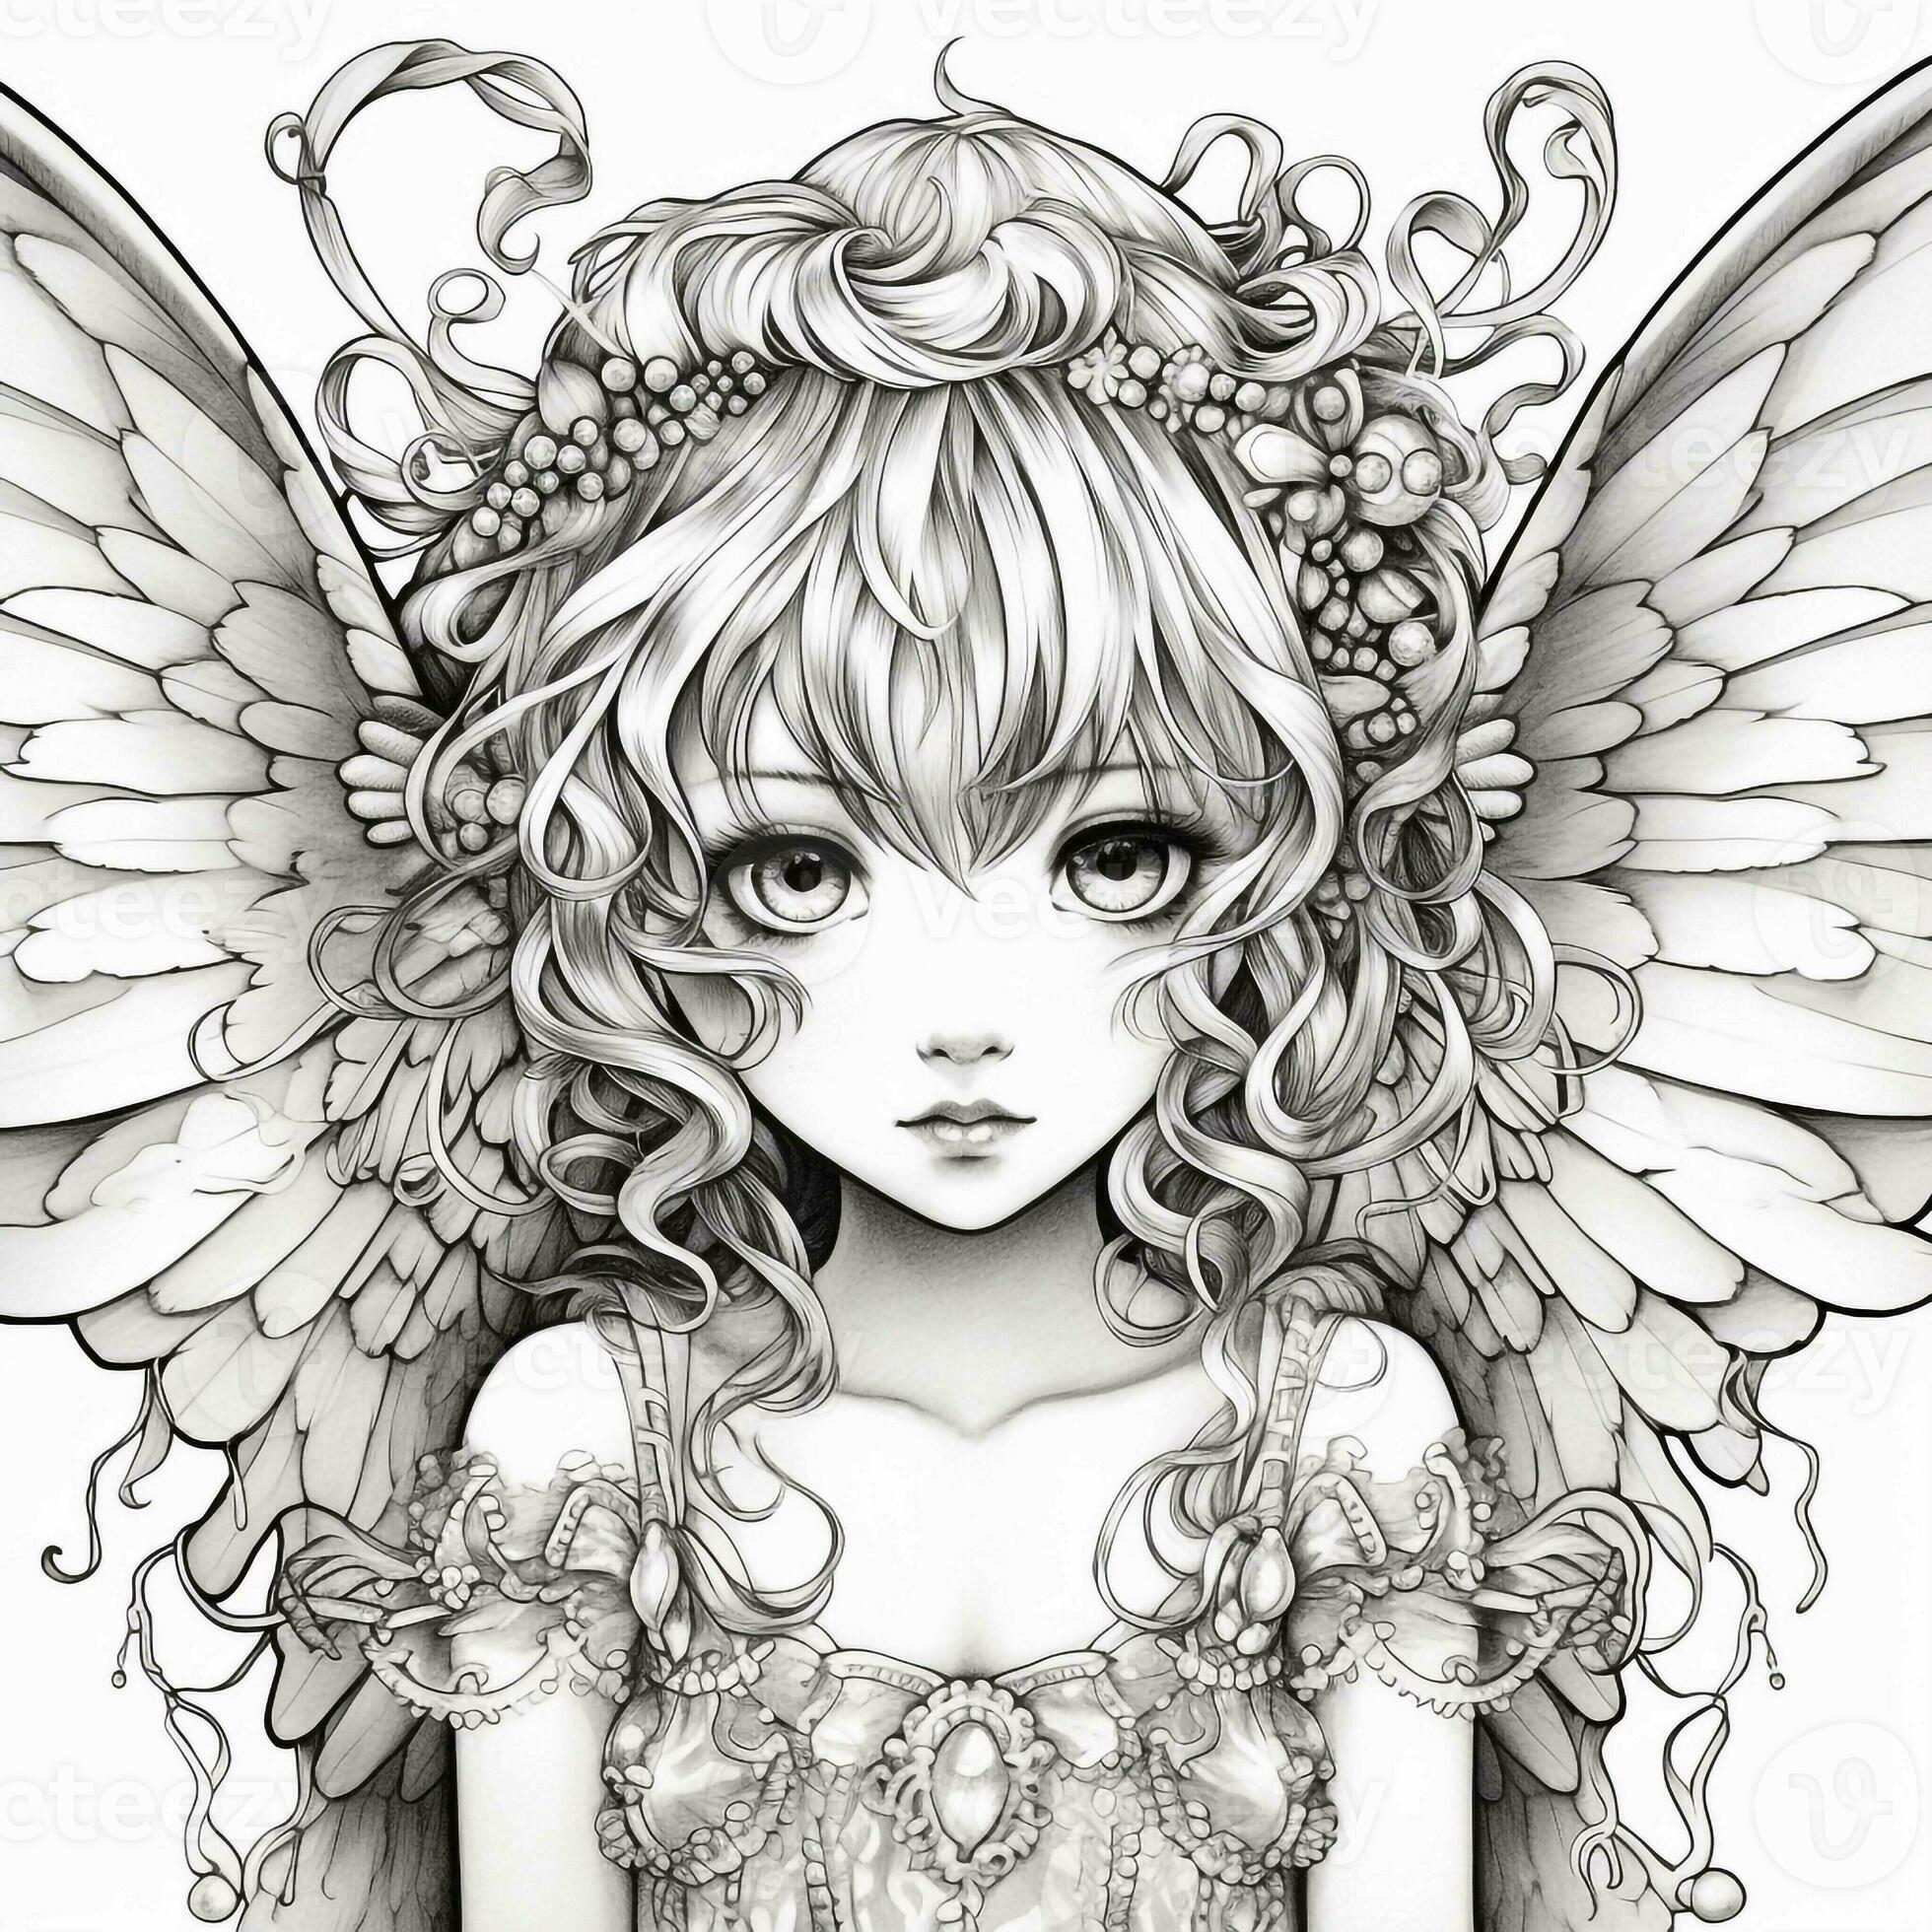 https://static.vecteezy.com/system/resources/previews/026/628/163/large_2x/fairy-girl-coloring-pages-photo.jpg